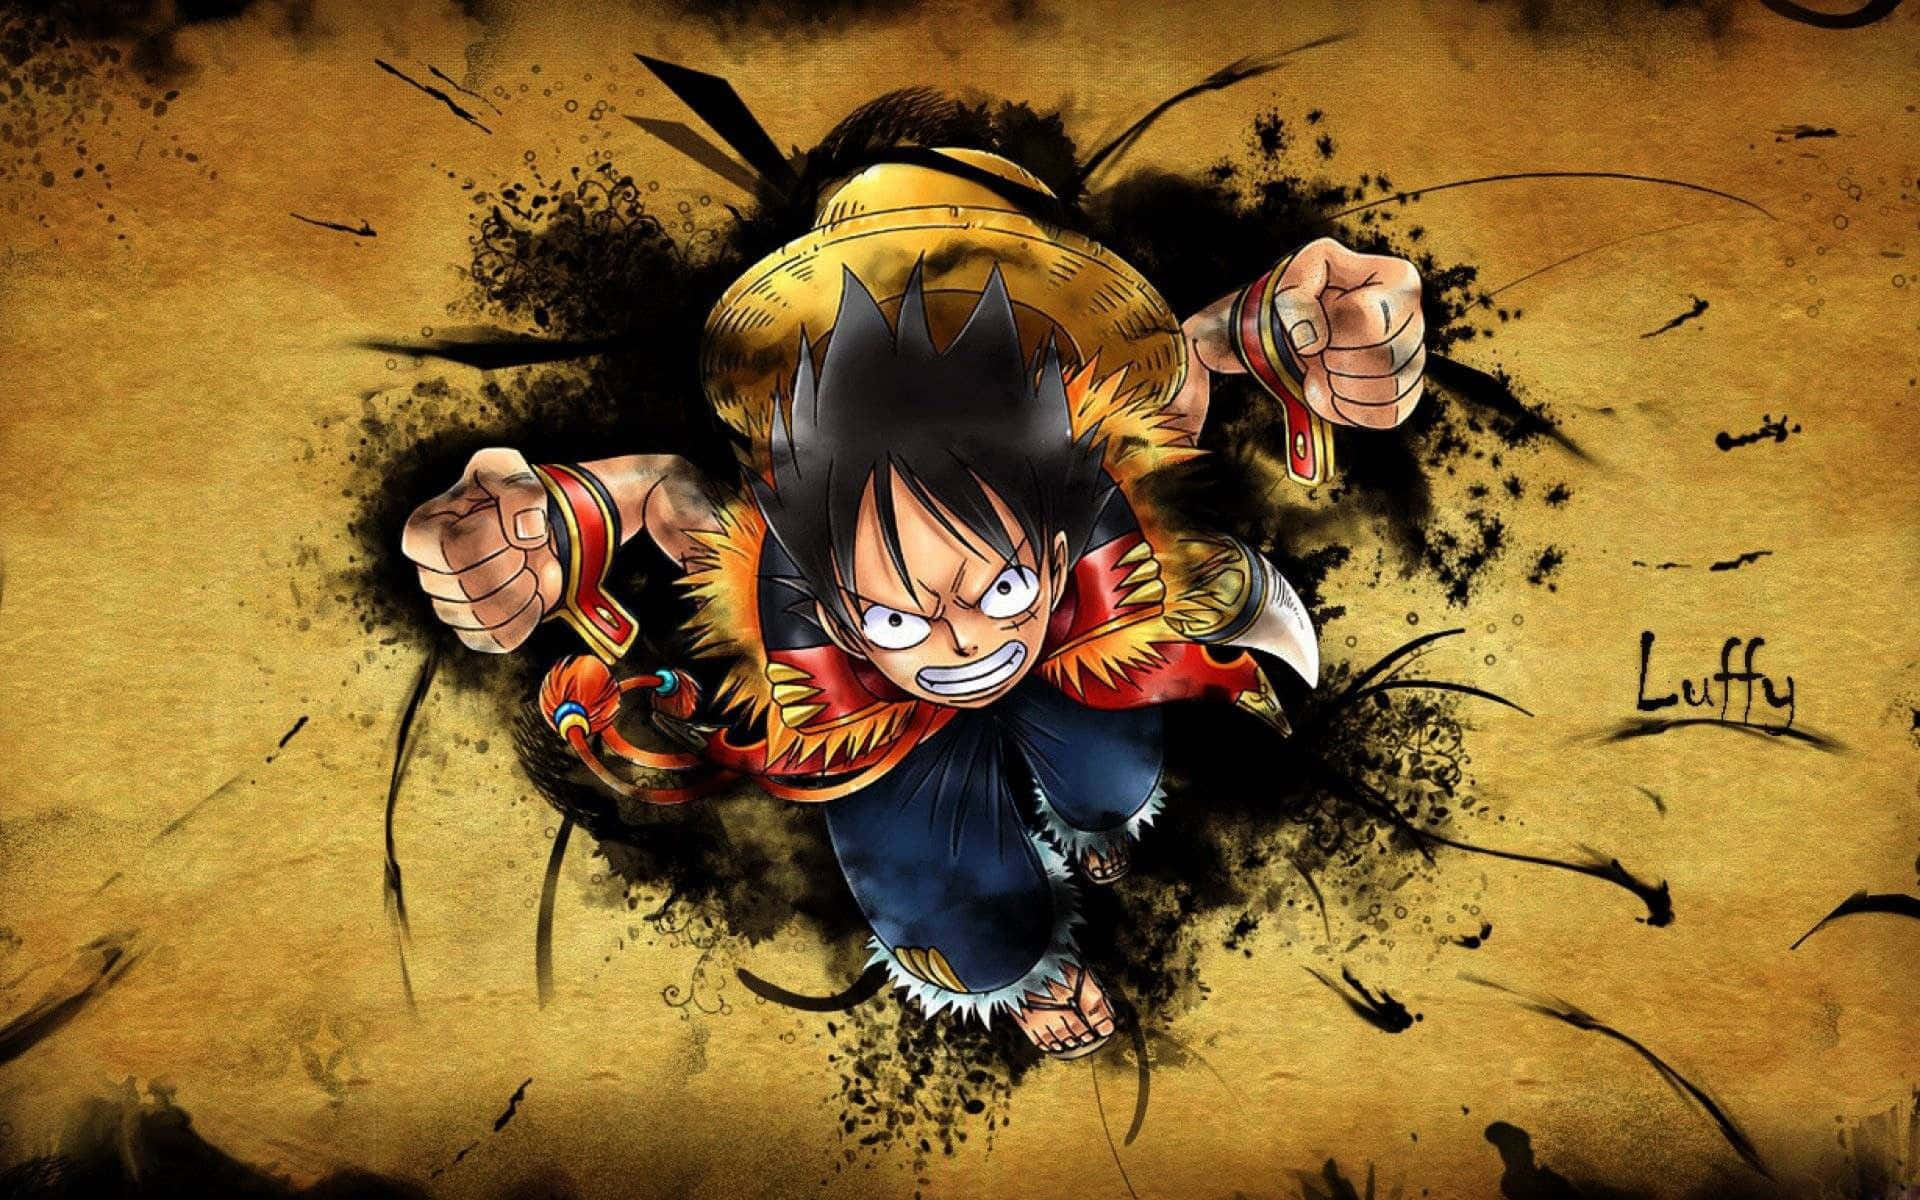 Cool Luffy snapping his fingers with style Wallpaper